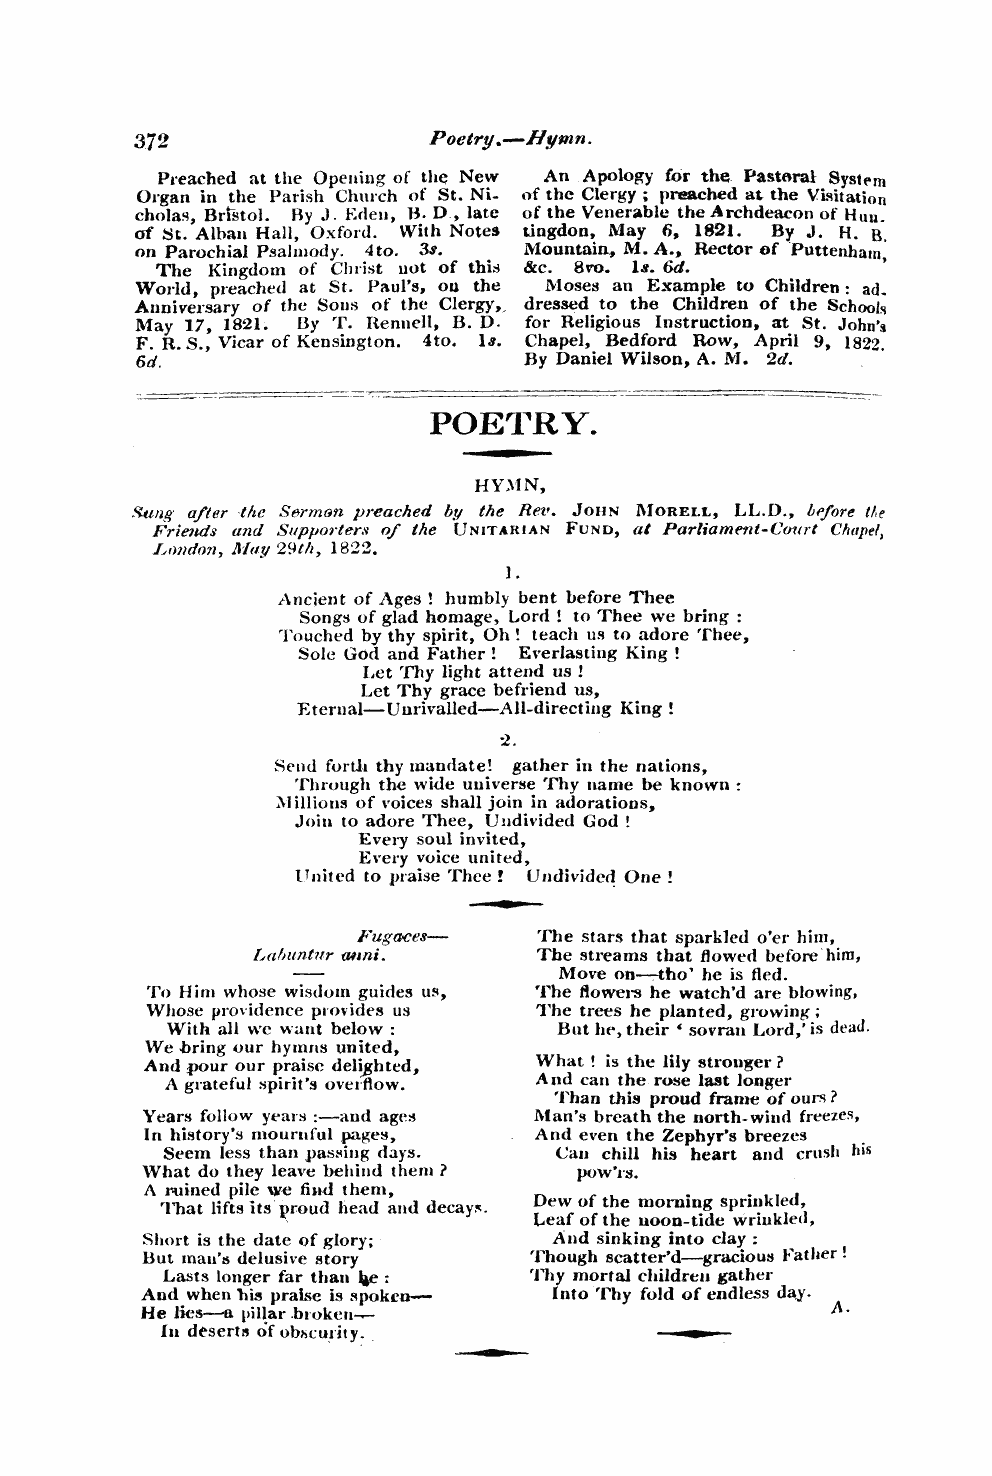 Monthly Repository (1806-1838) and Unitarian Chronicle (1832-1833): F Y, 1st edition - Poetry.